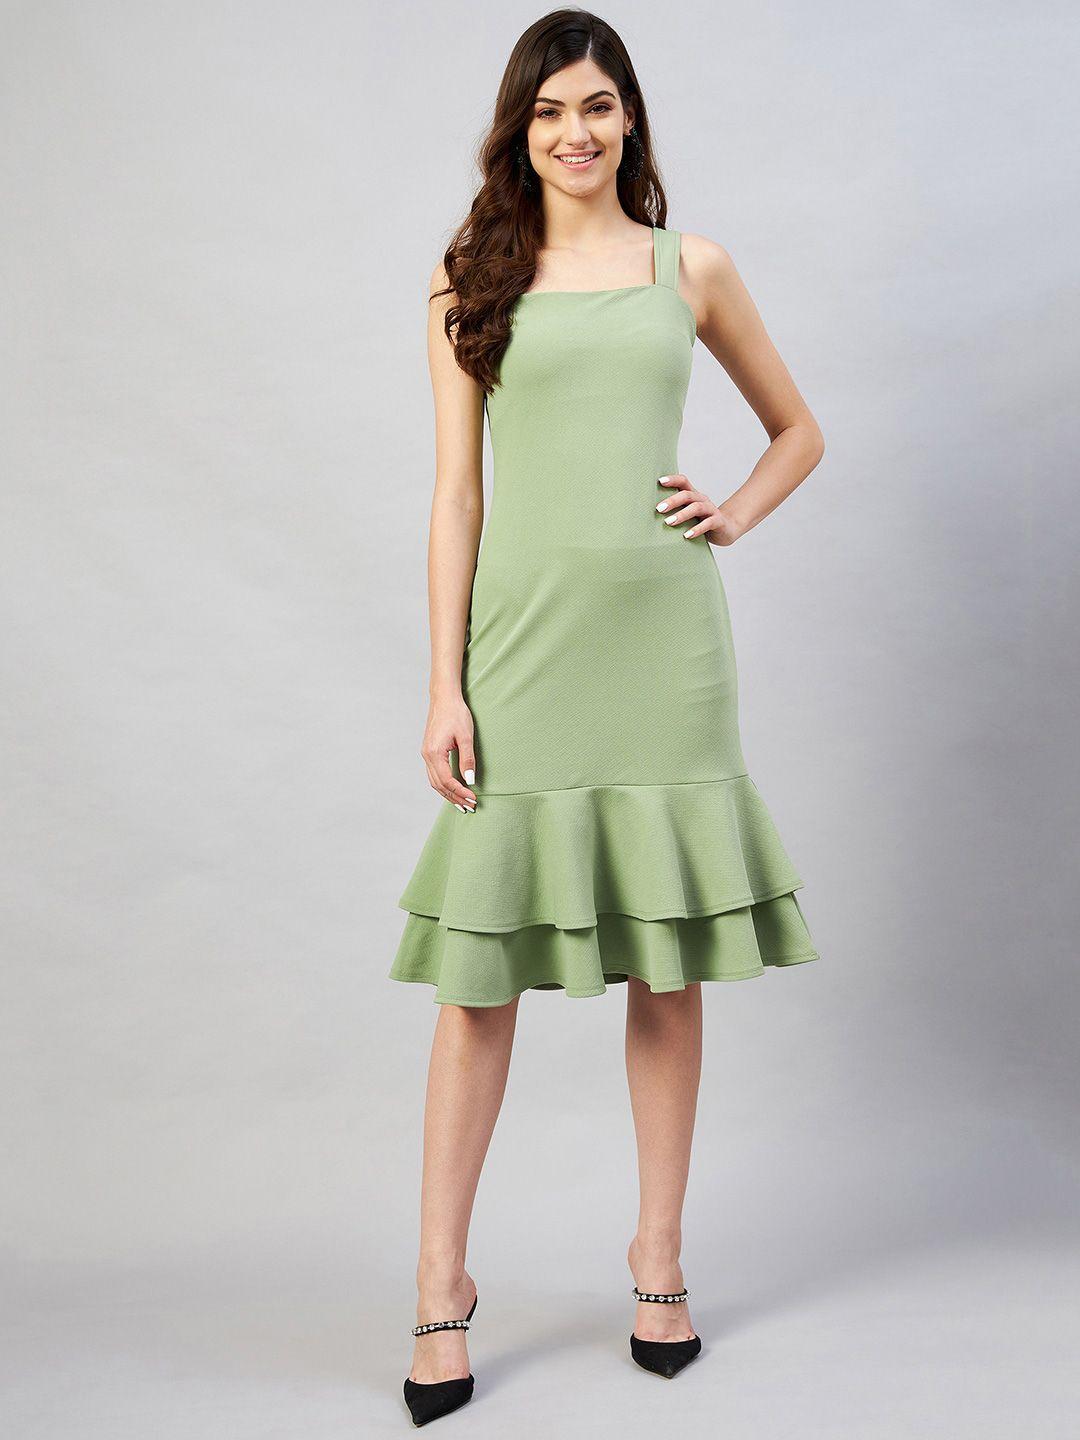 marie claire women olive green a-line midi dress